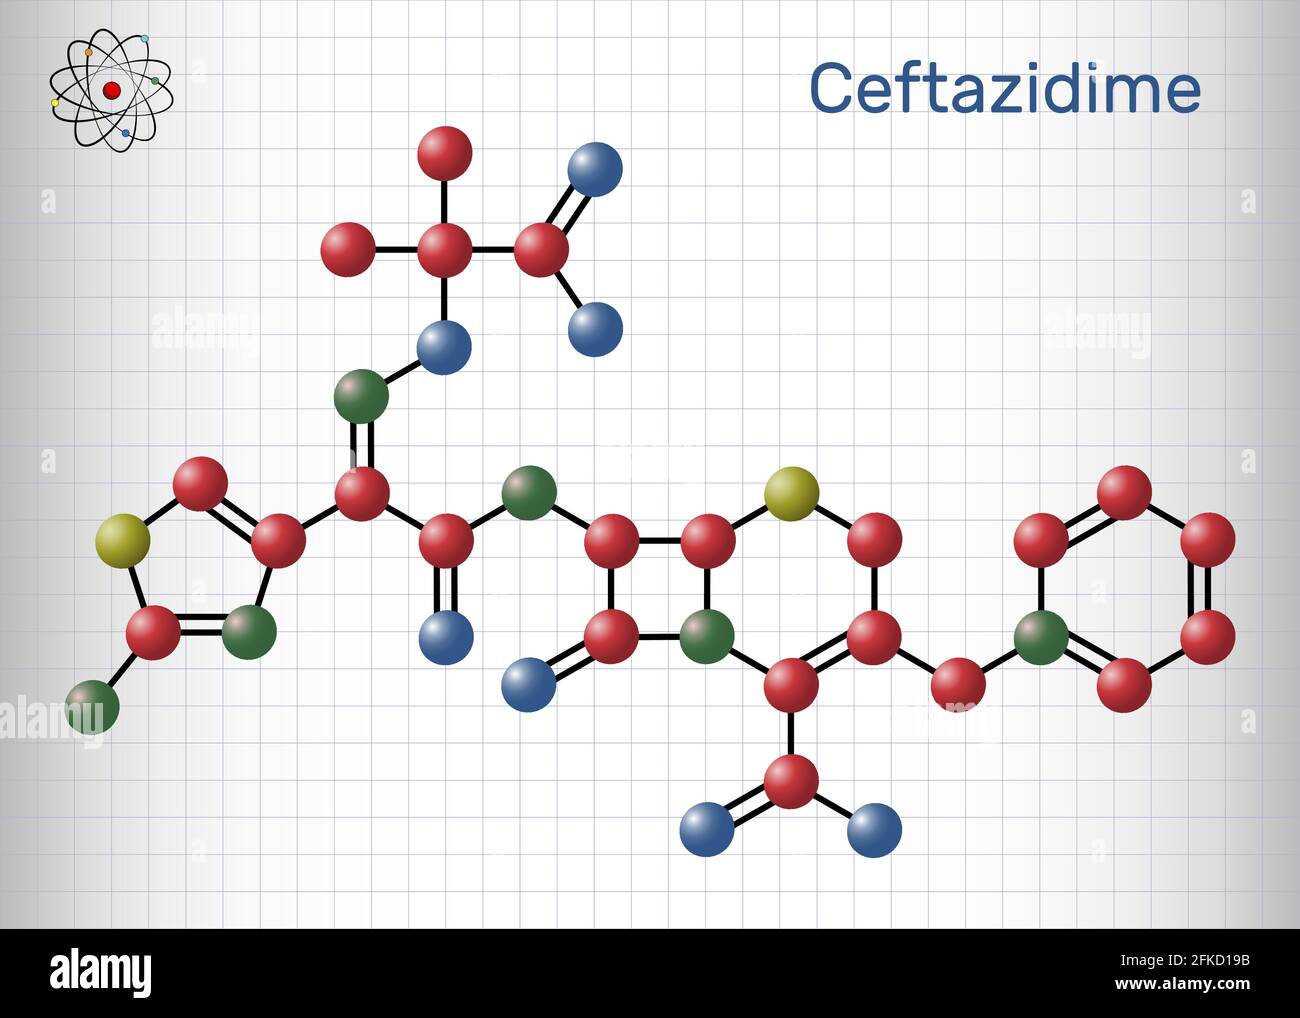 Ceftazidime molecule. It is cephalosporin, semisynthetic, antibacterial, antibiotic derived from cephaloridine. Sheet of paper in a cage. Vector illus Stock Vector